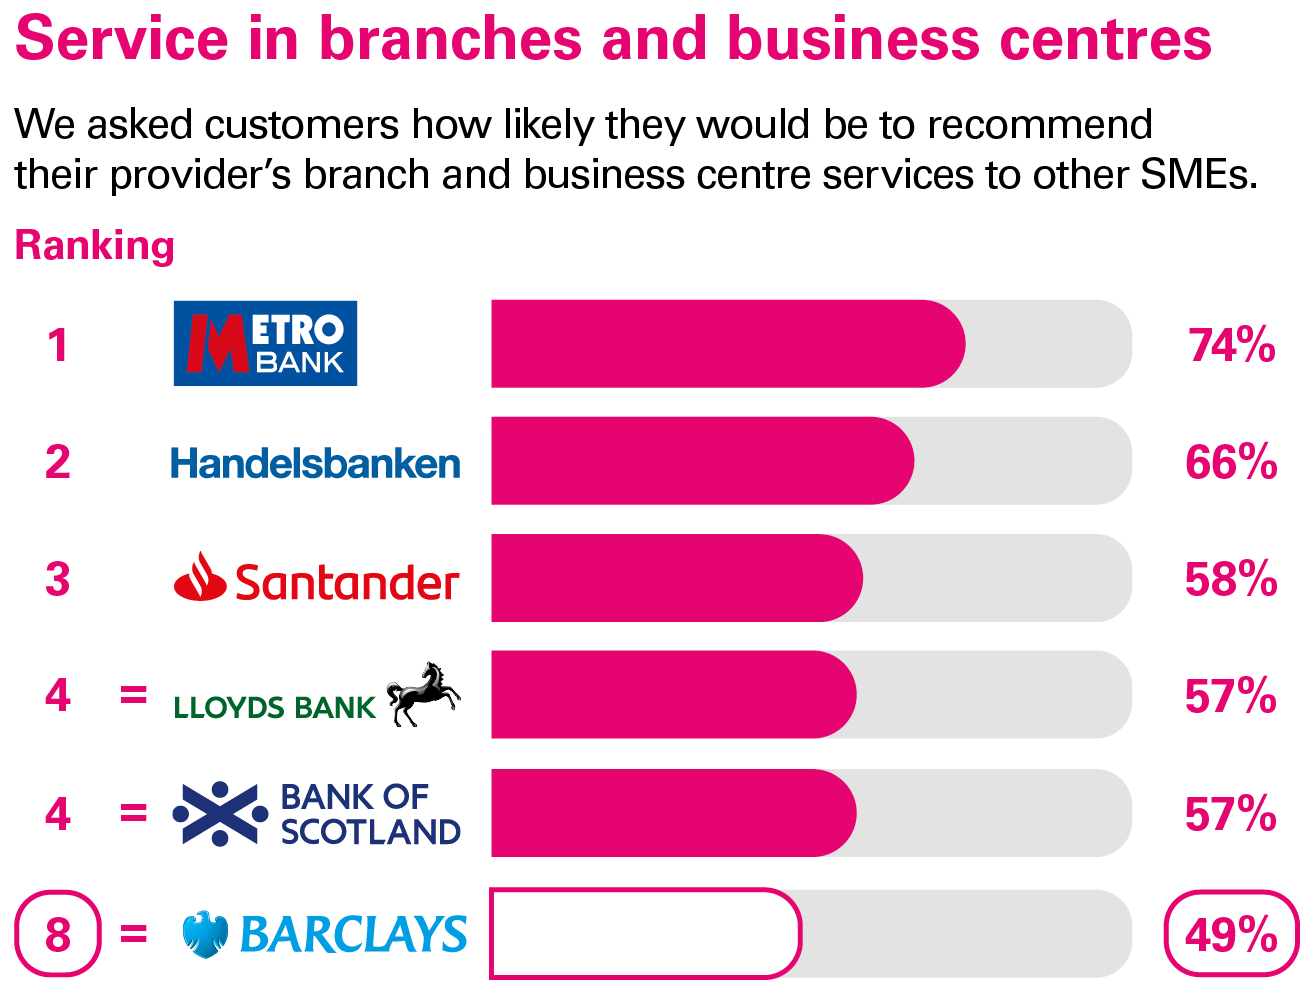 Services in branches and business centres ranking - Business current accounts